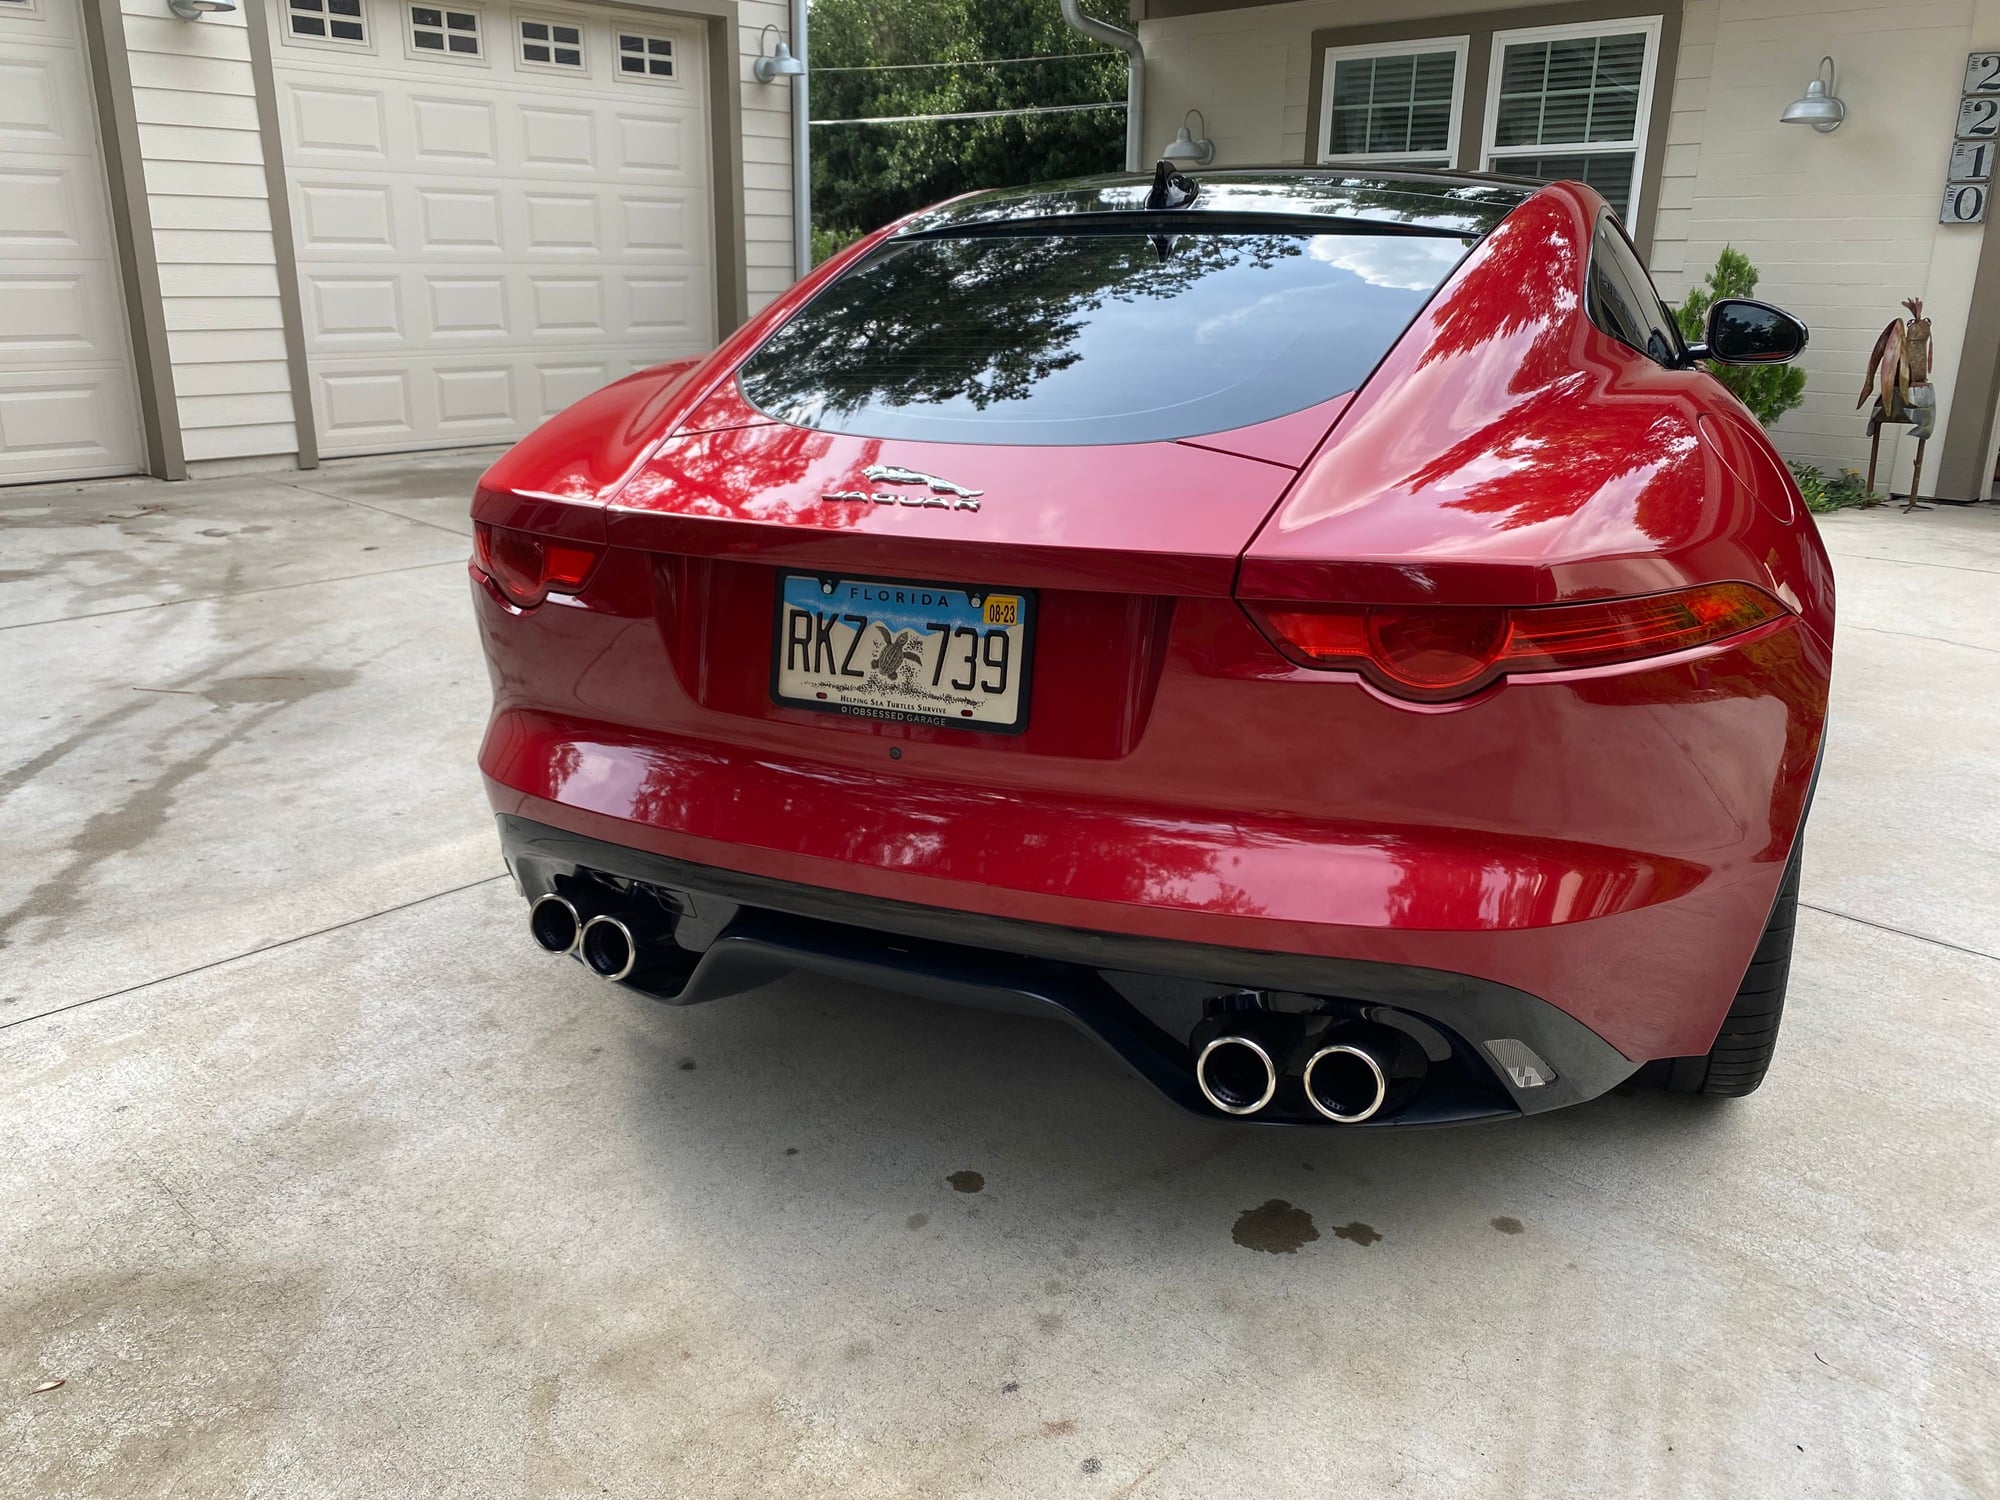 2015 Jaguar F-Type - 2015 Jaguar F-type R coupe - Used - VIN SAJWA6DA1FMK14785 - 87,730 Miles - 8 cyl - 2WD - Automatic - Coupe - Red - Gainesville, FL 32603, United States